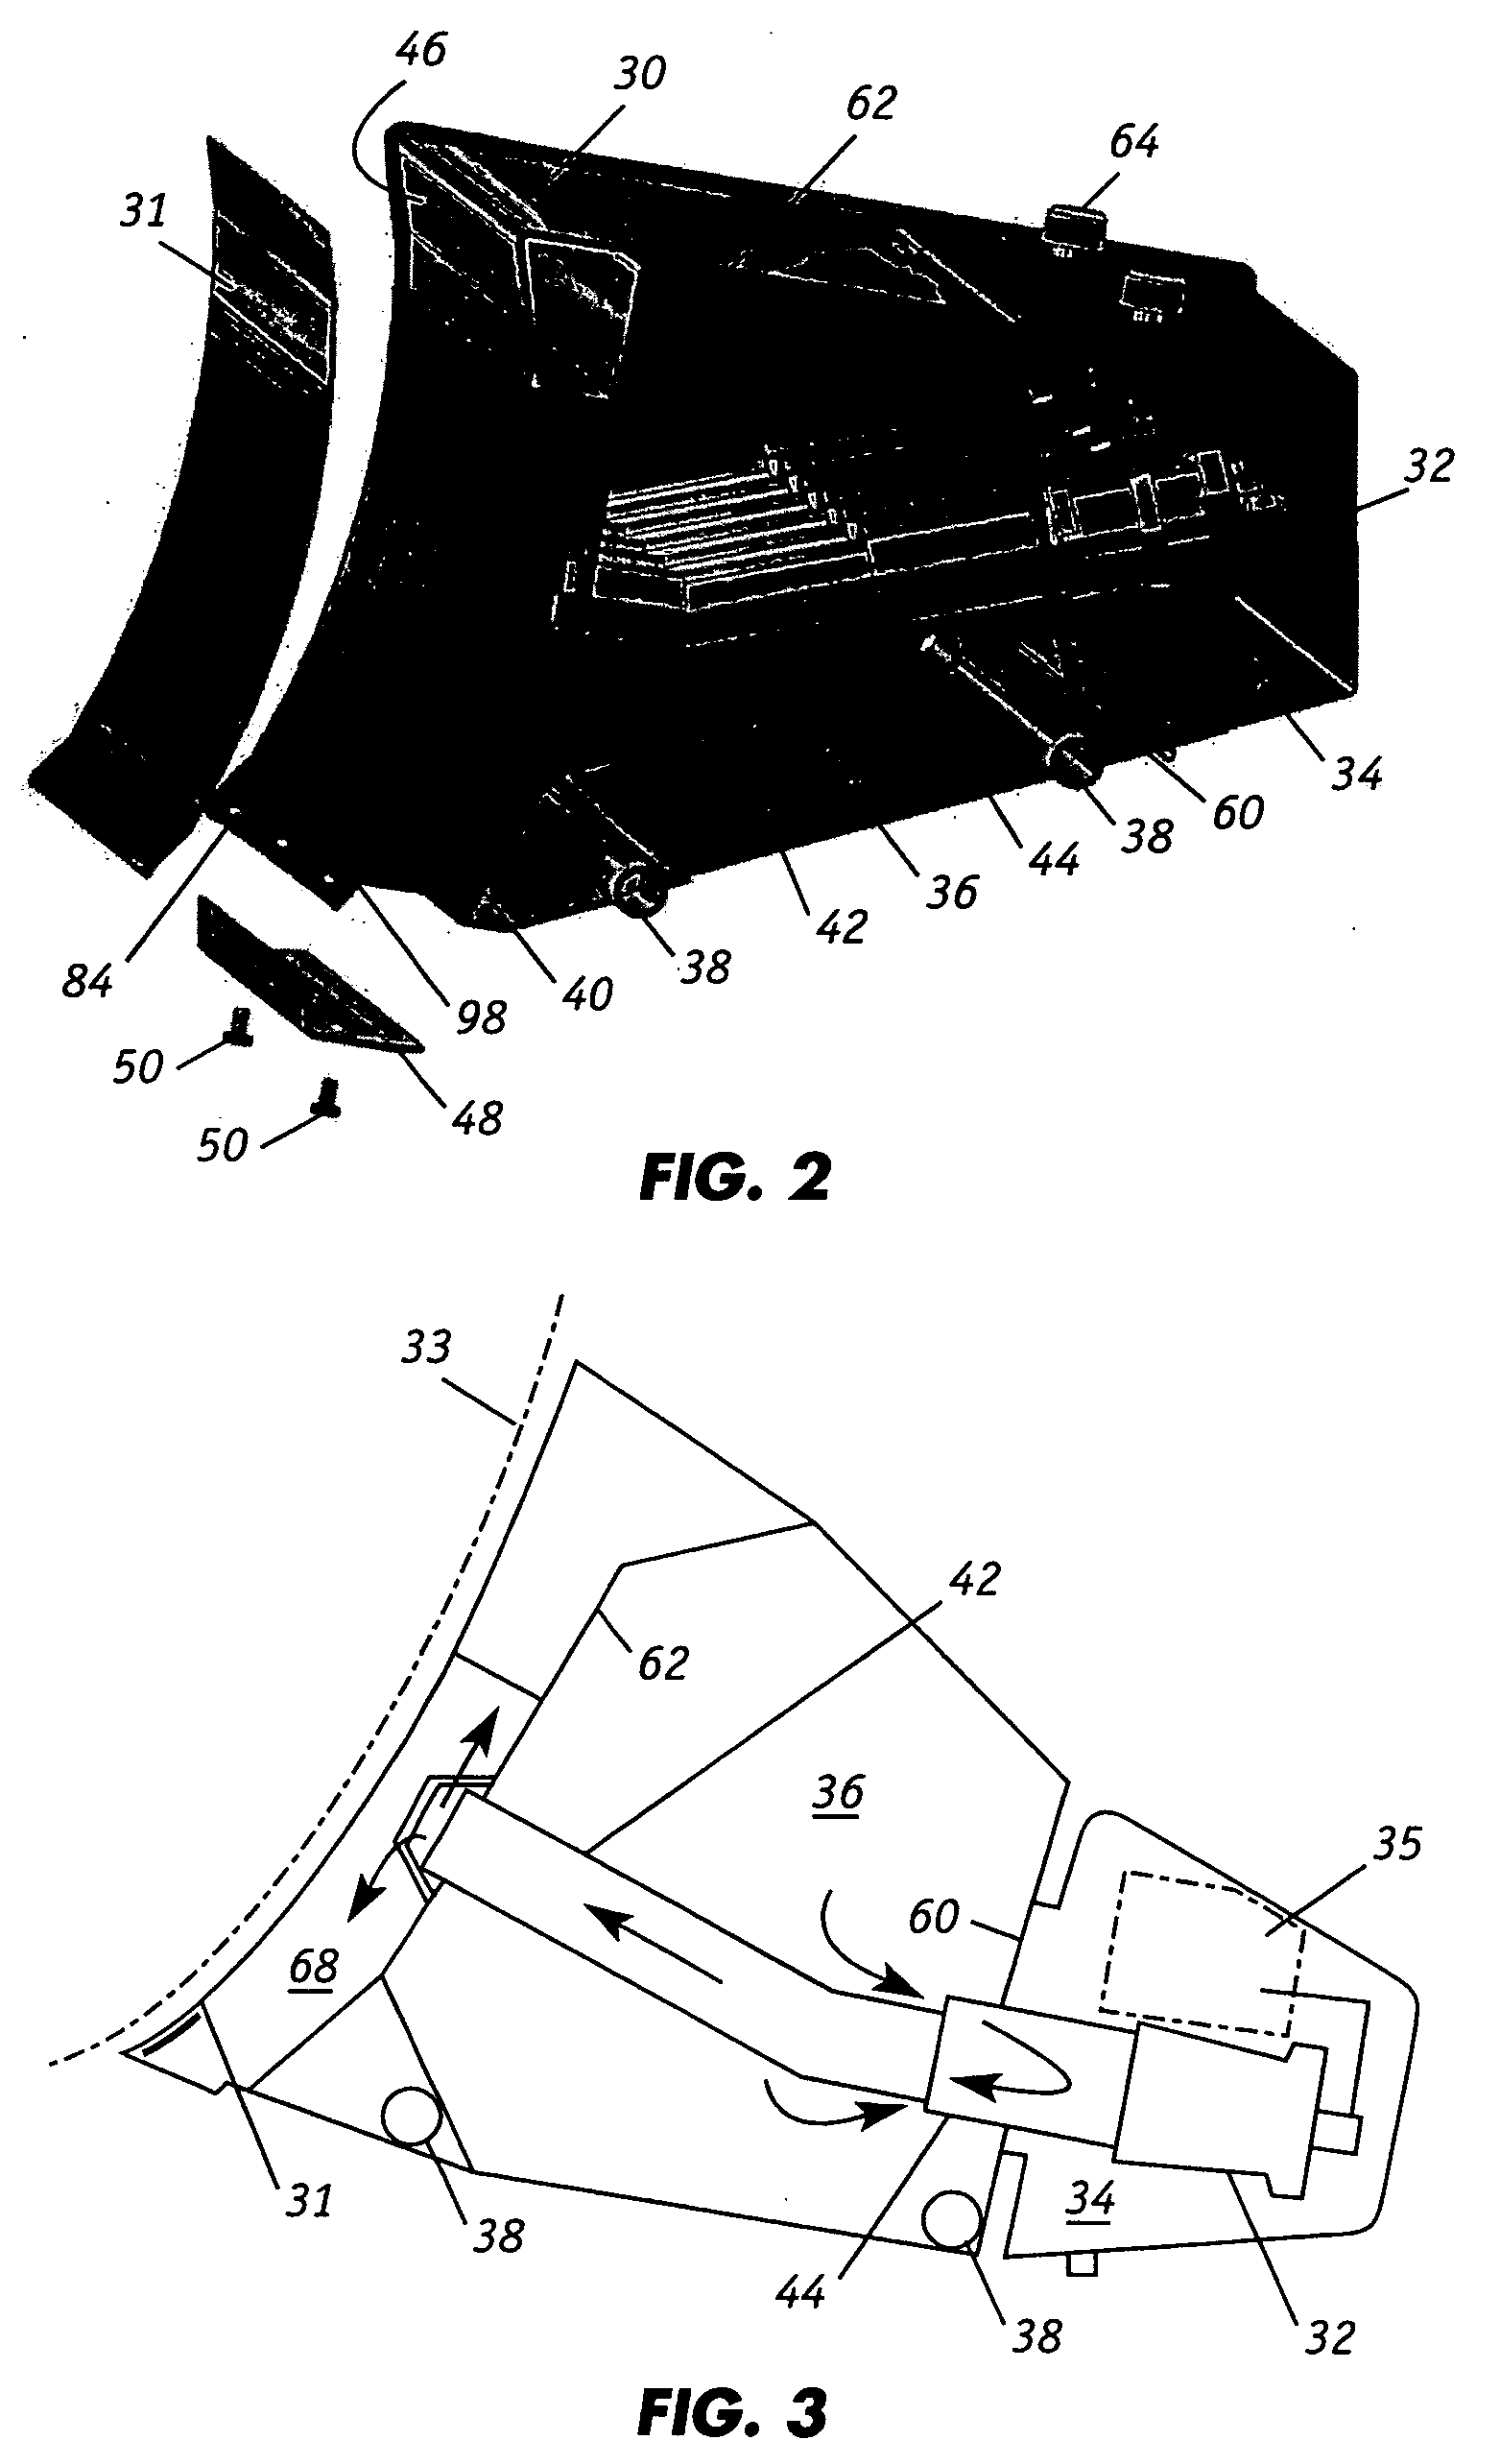 Steam distribution apparatus with removable cover for internal access